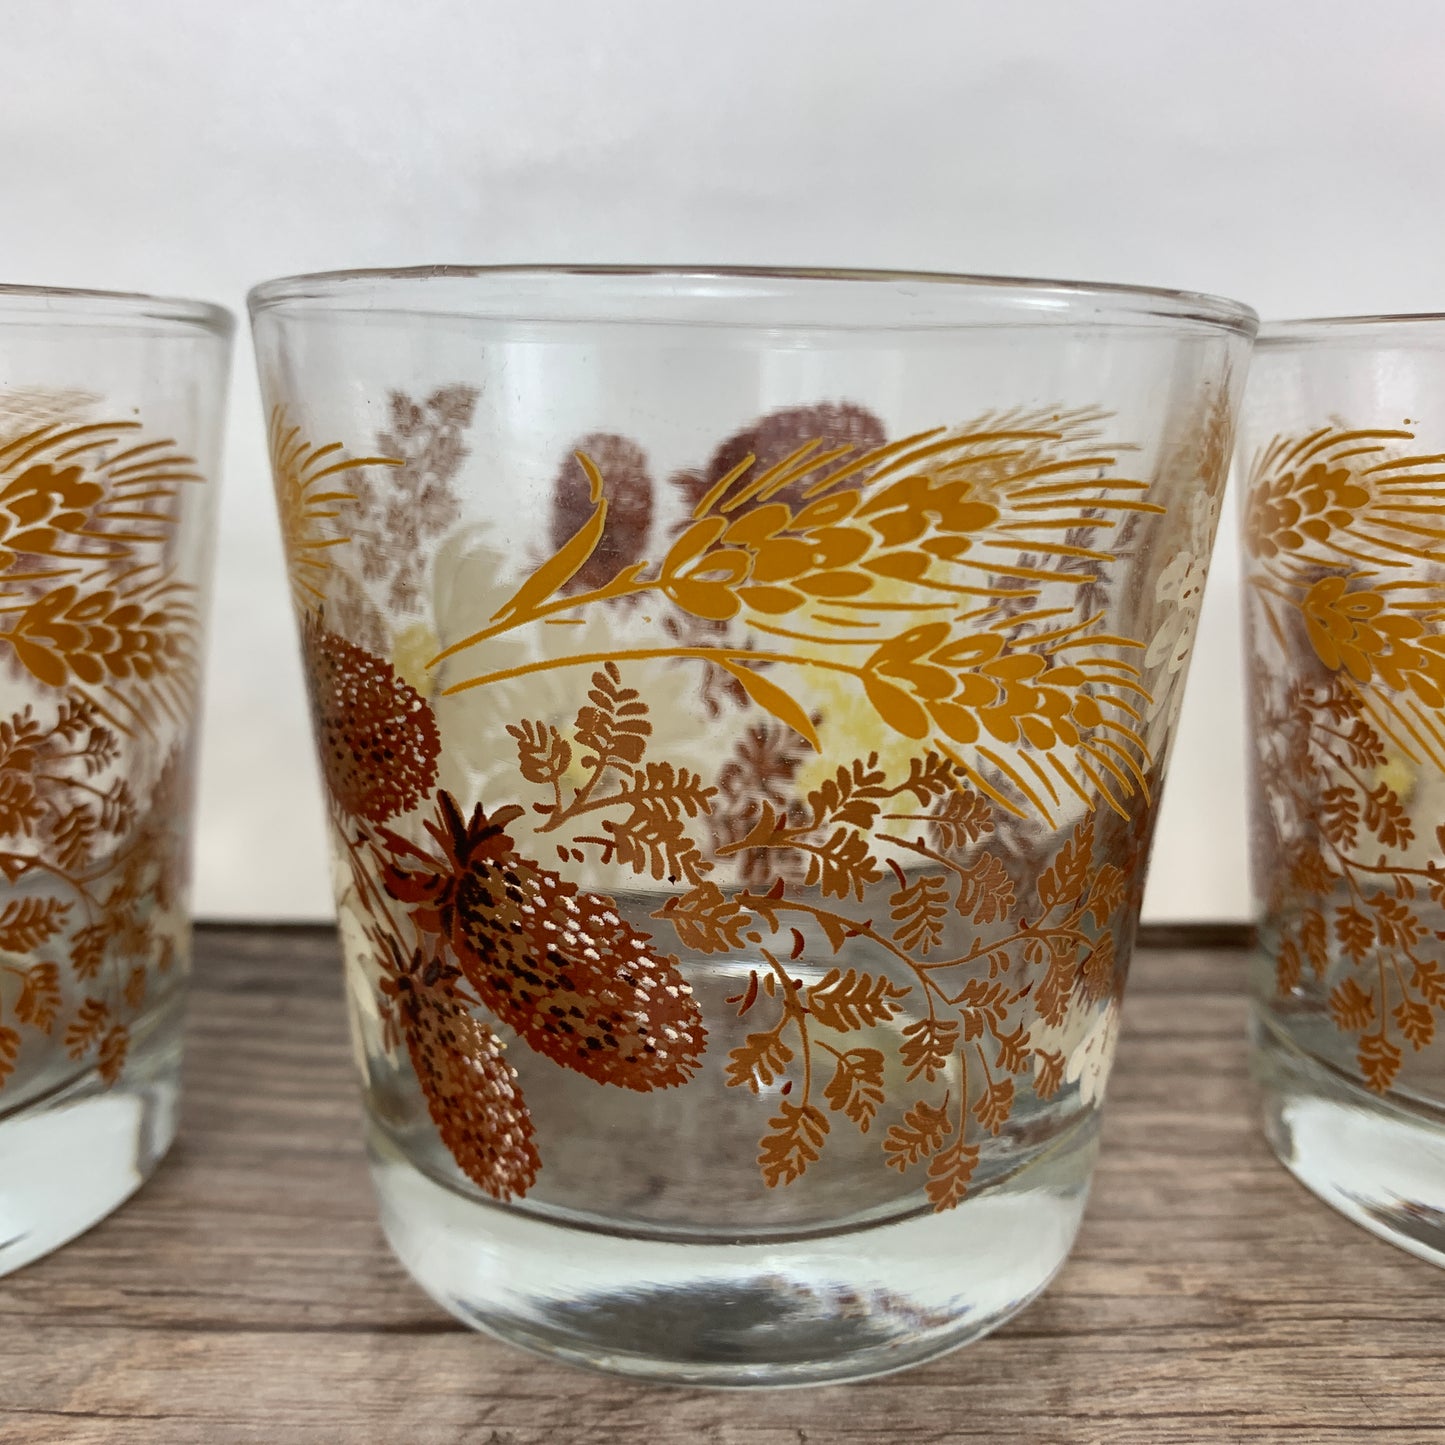 Vintage Juice Glasses with Fall Theme Design Set of 4